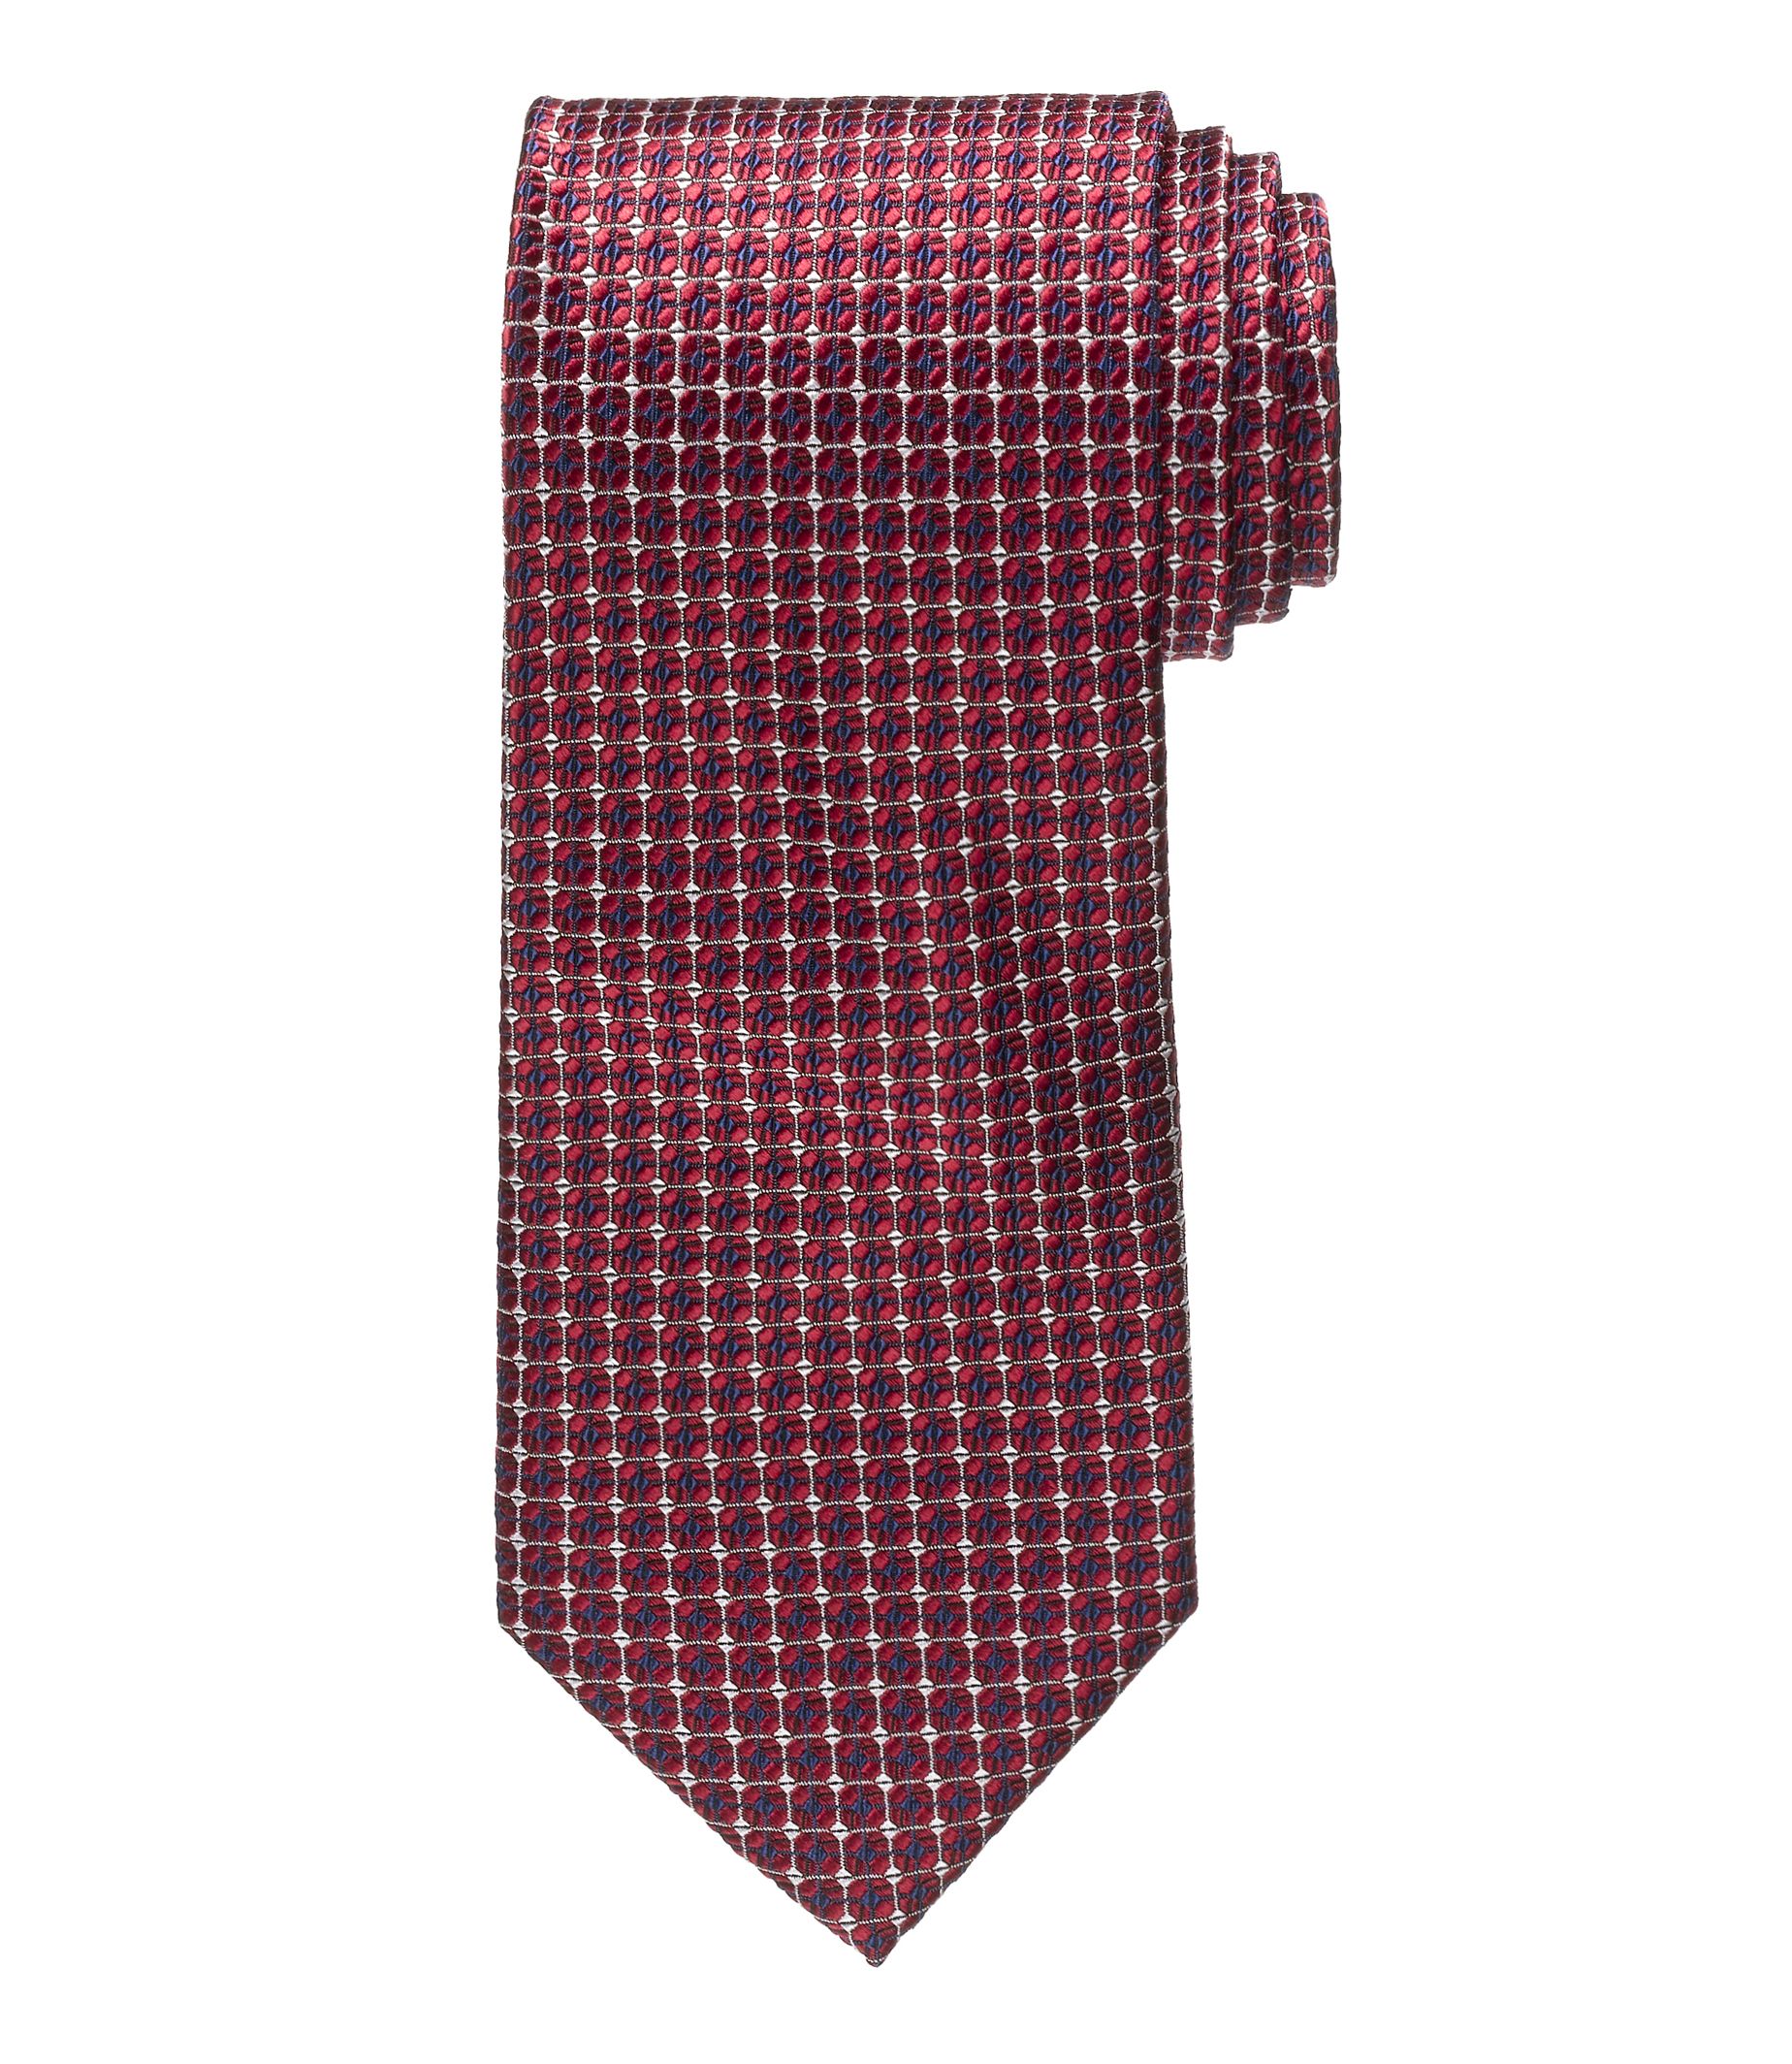 Executive Micro Grid Tie | Flashpoint